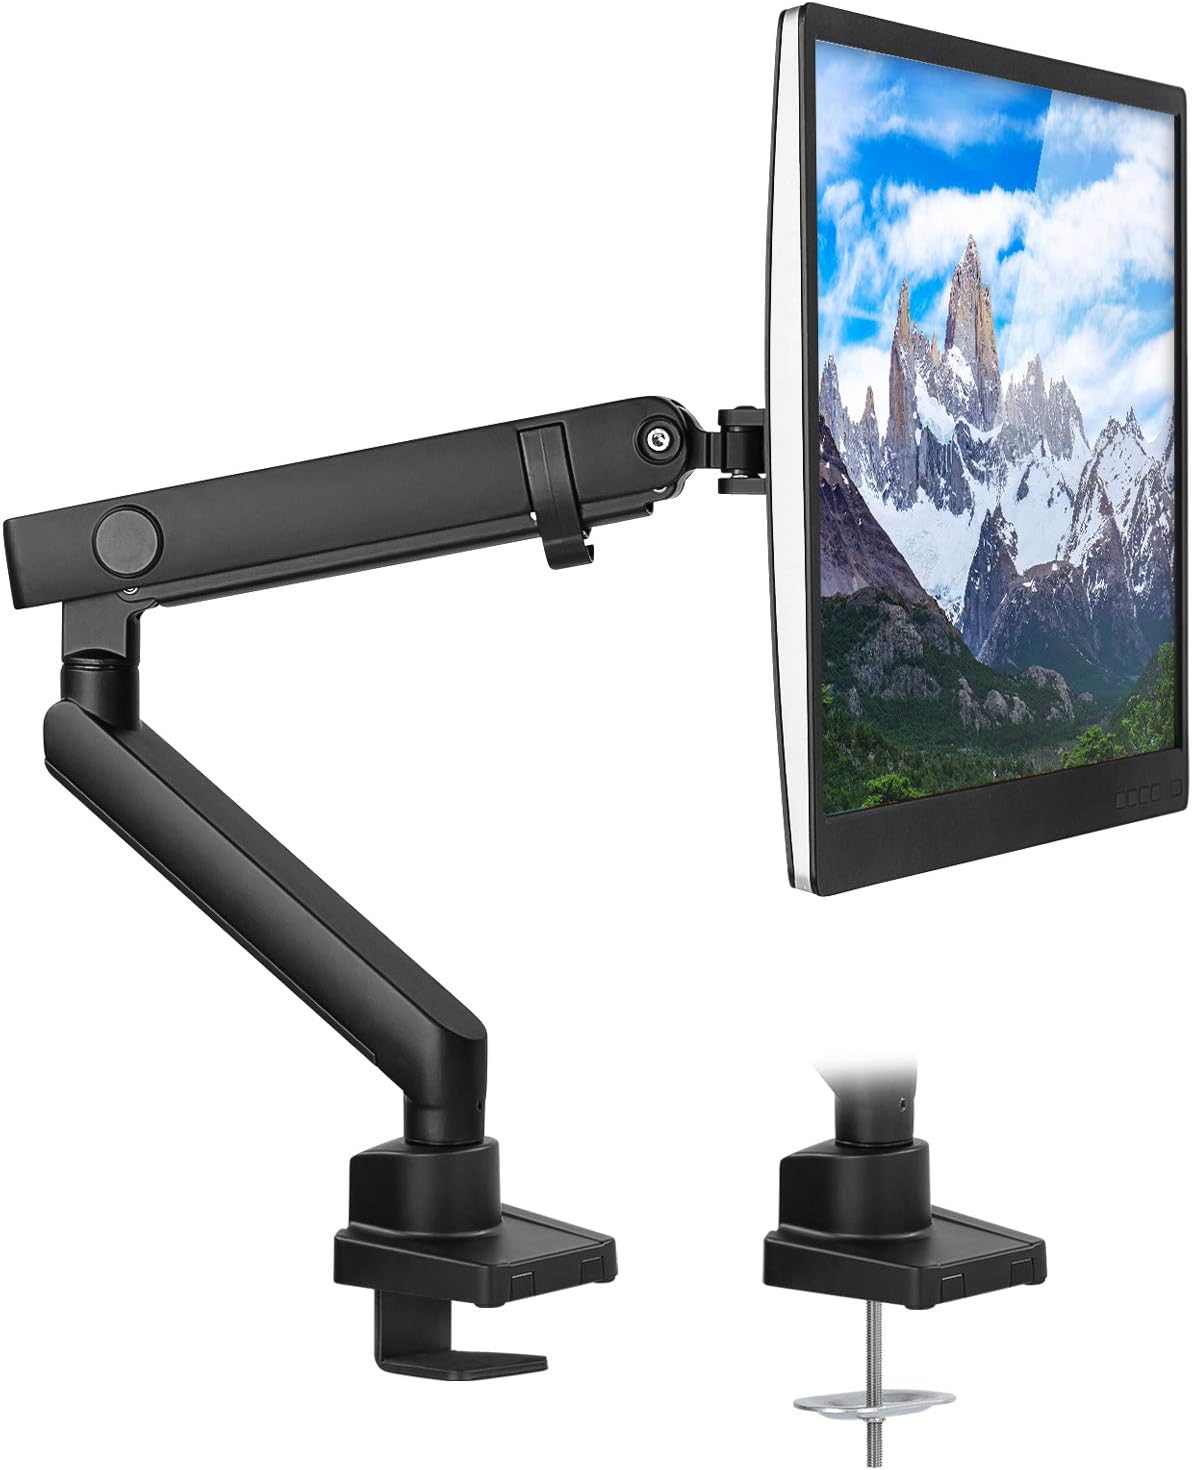 Mount-It! Single Monitor Arm Mount | Premium Monitor Desk Stand | Articulating Mechanical Spring Arm | Fits 24 27 30 32 Inch VESA 75 100 Compatible Computer Screen | C-Clamp and Grommet Bases